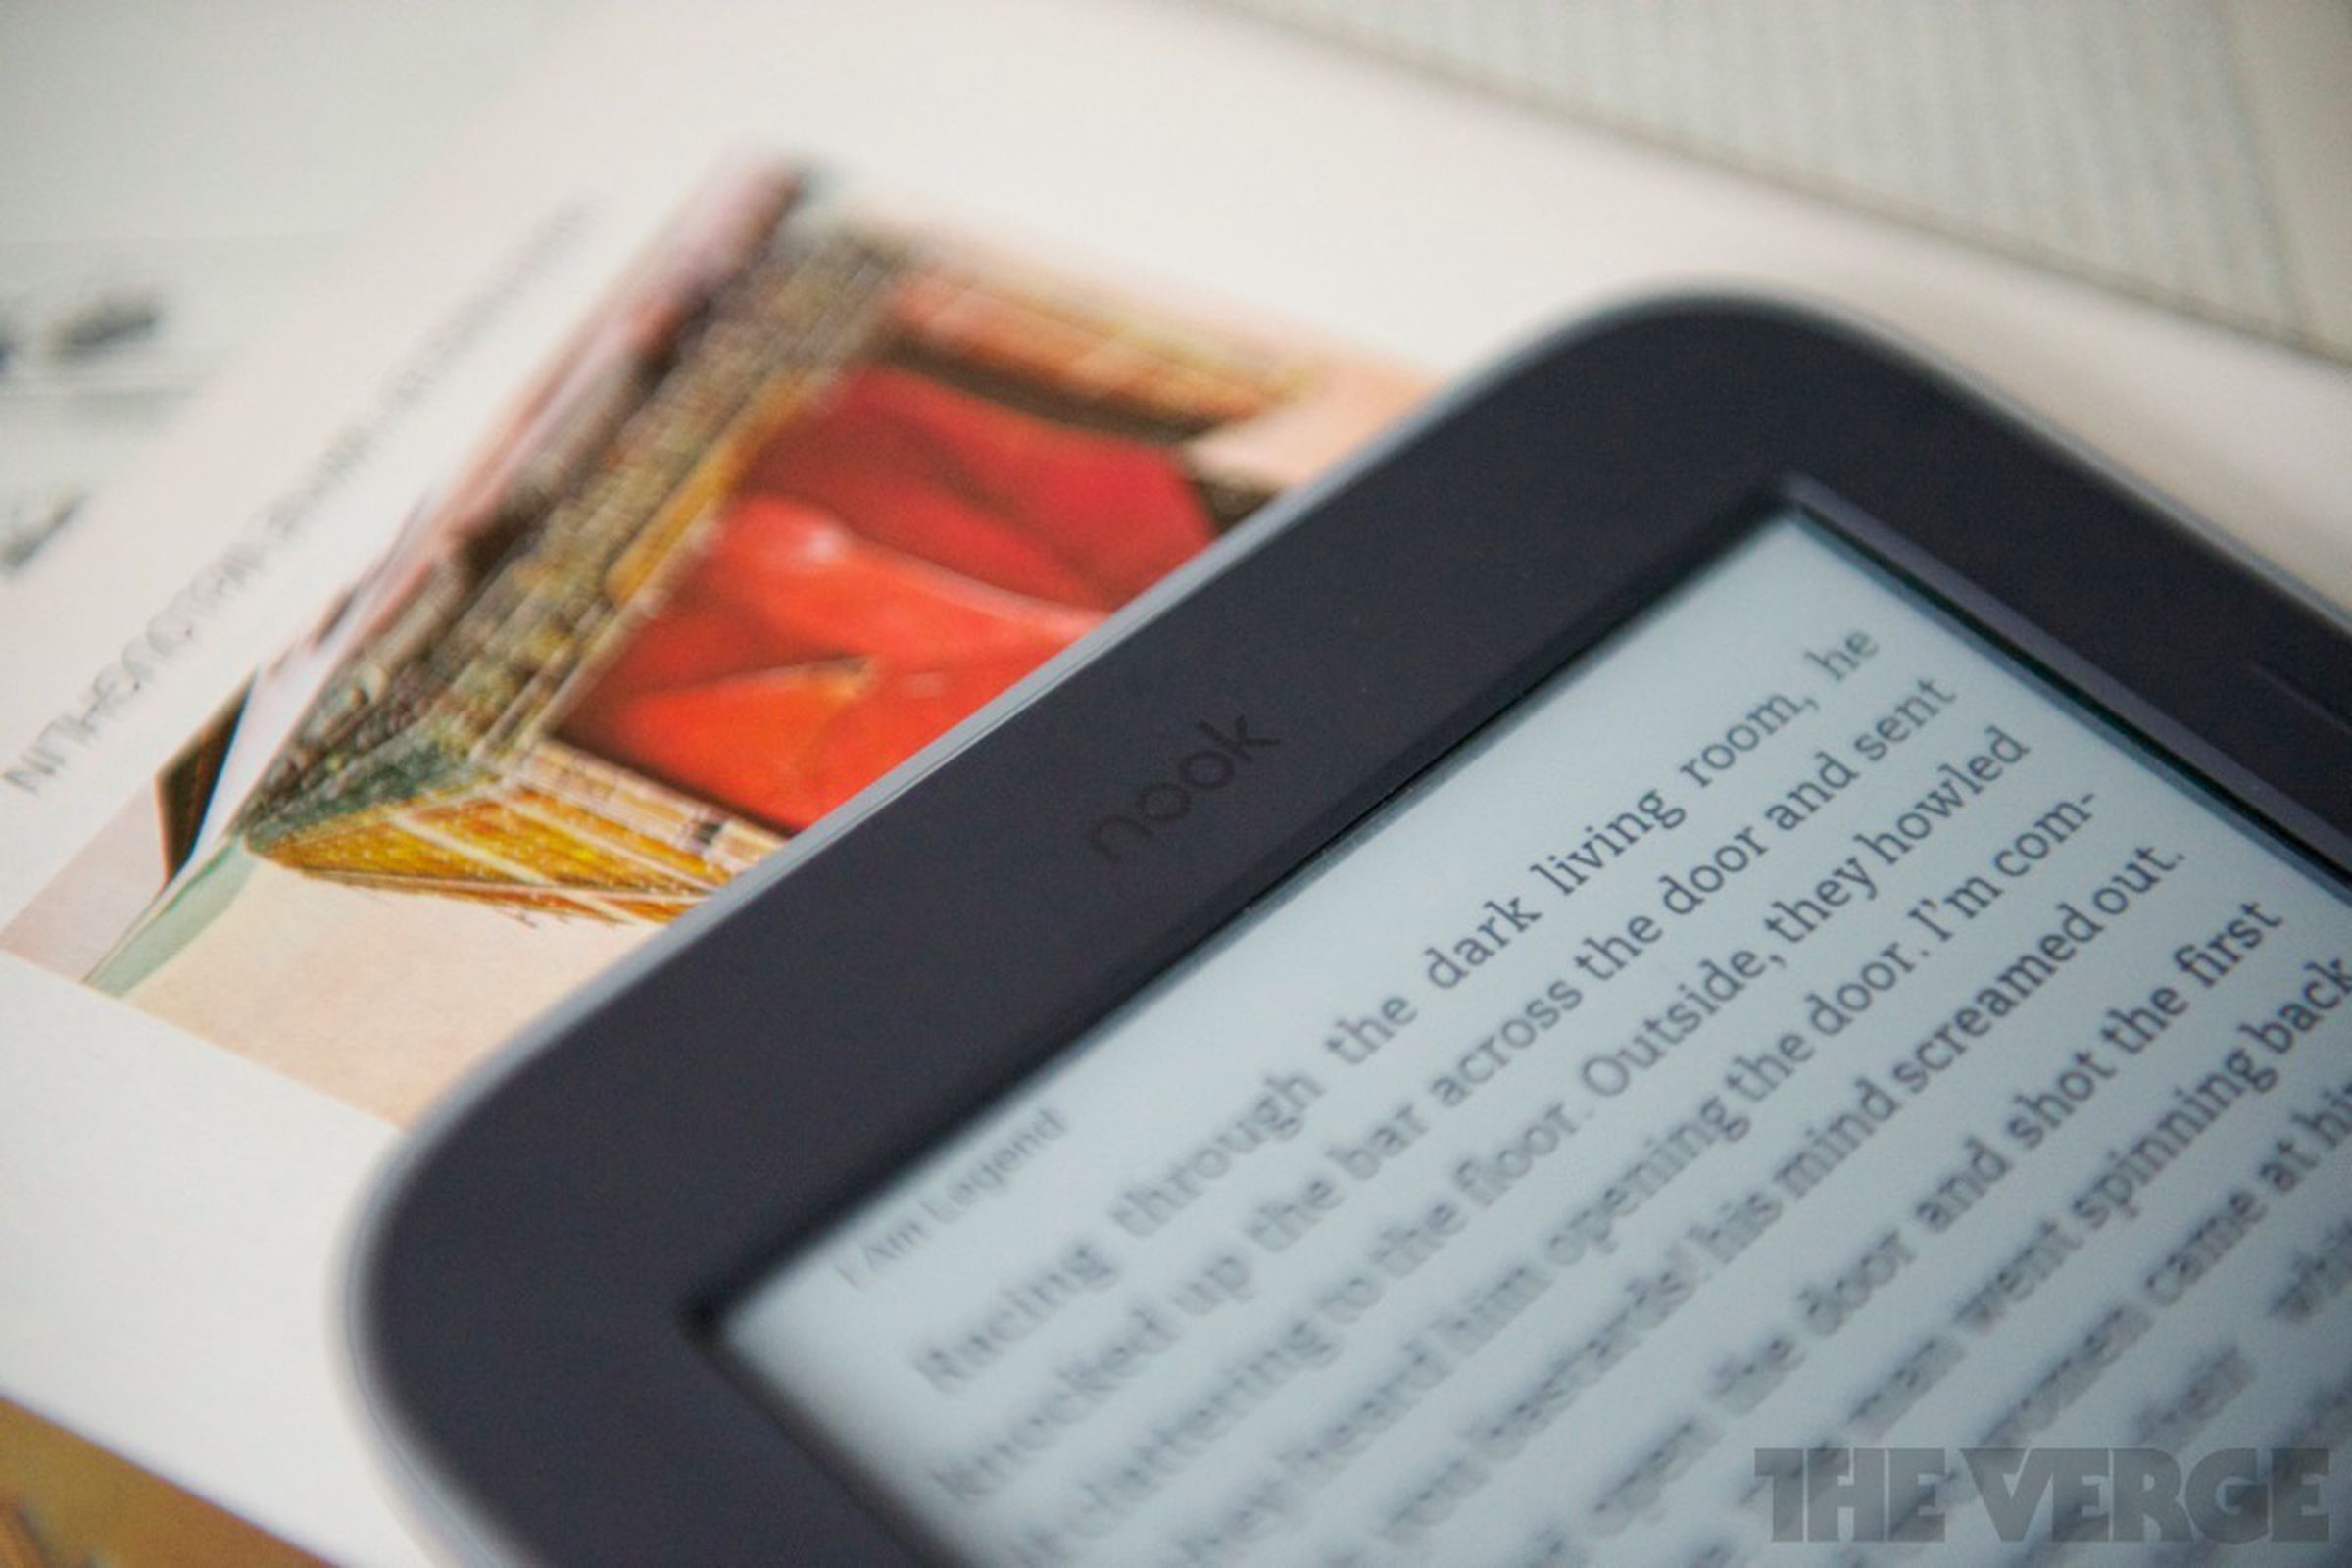 Gallery Photo: Barnes & Noble Nook Simple Touch with GlowLight review pictures